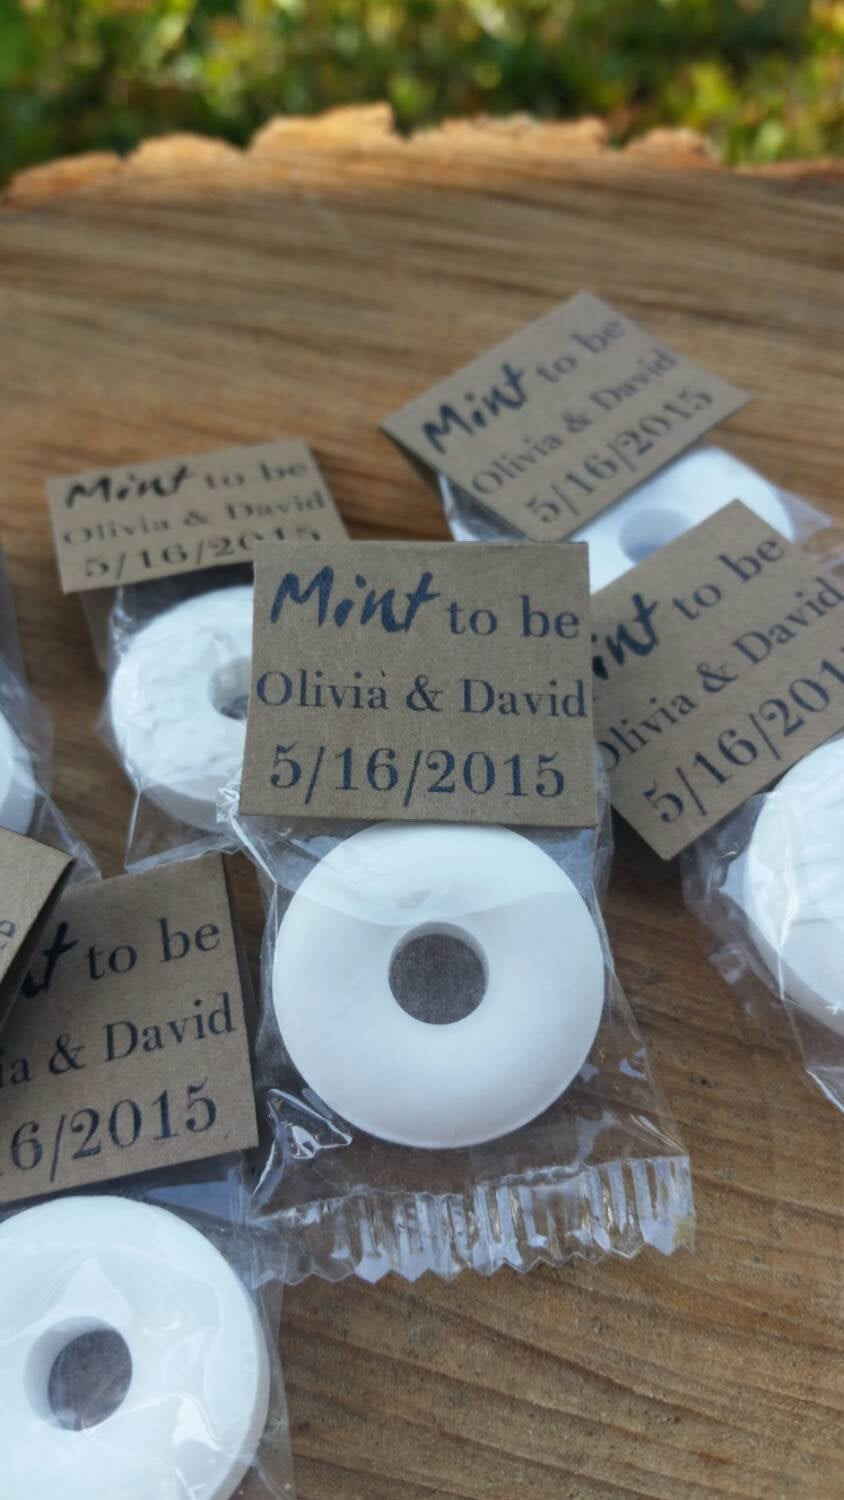 Wedding Favors Cheap
 100 Mint to be wedding favors Rustic wedding by TagItWithLove